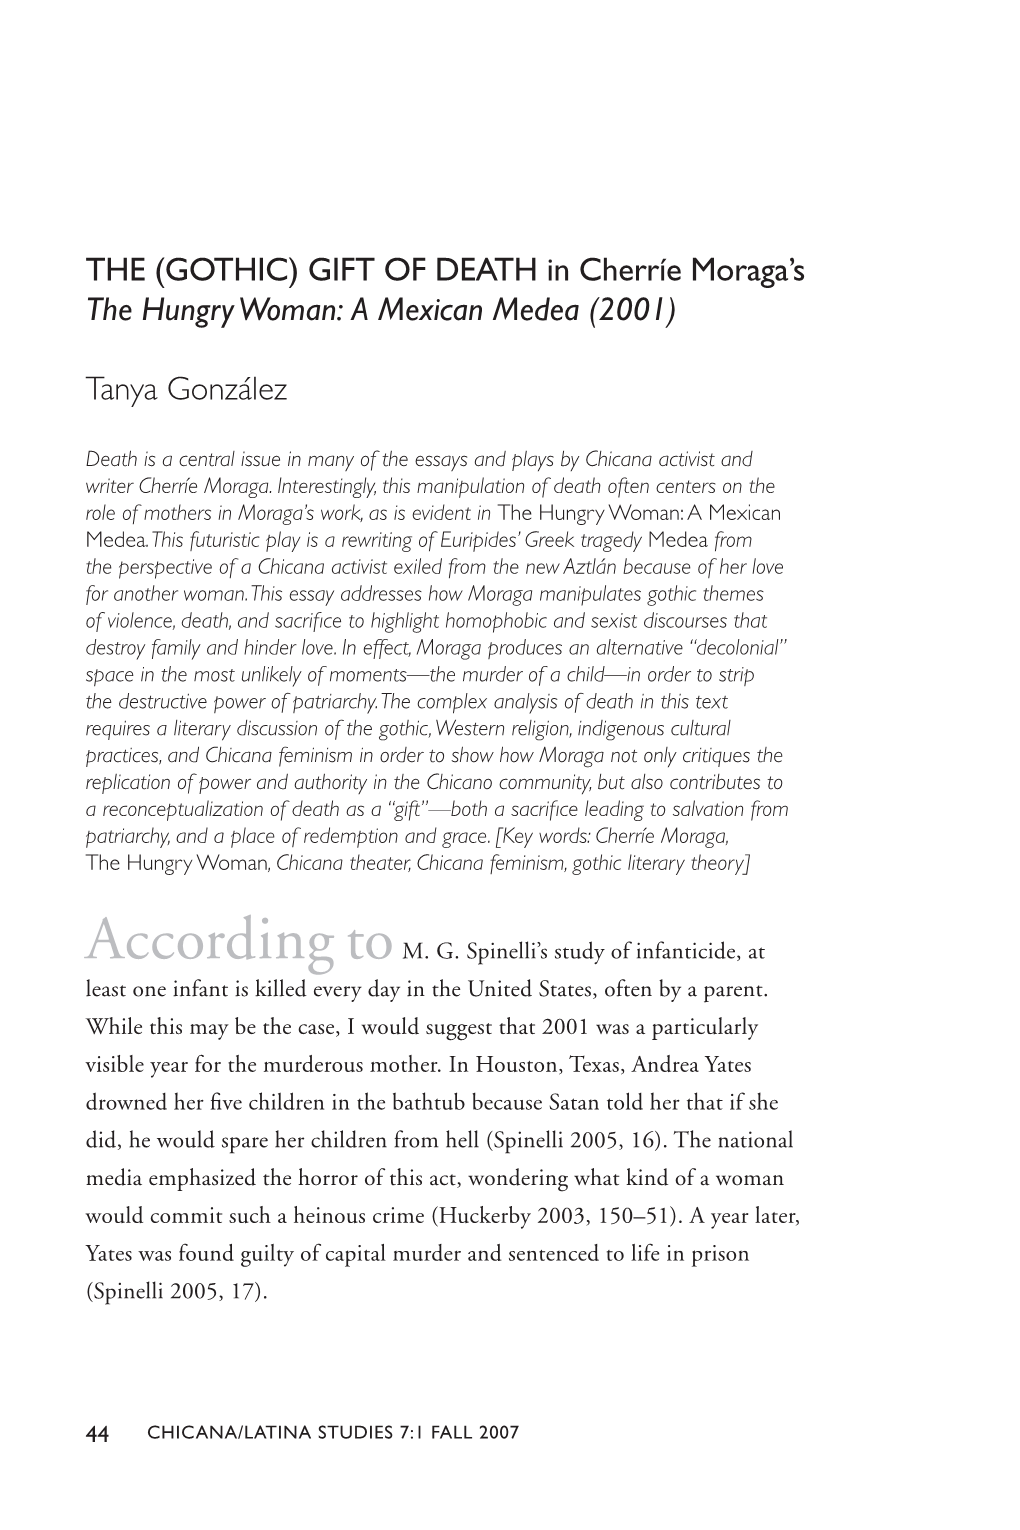 THE (Gothic) Gift of DEATH in Cherríe Moraga's the Hungry Woman: a Mexican Medea (2001) Tanya González